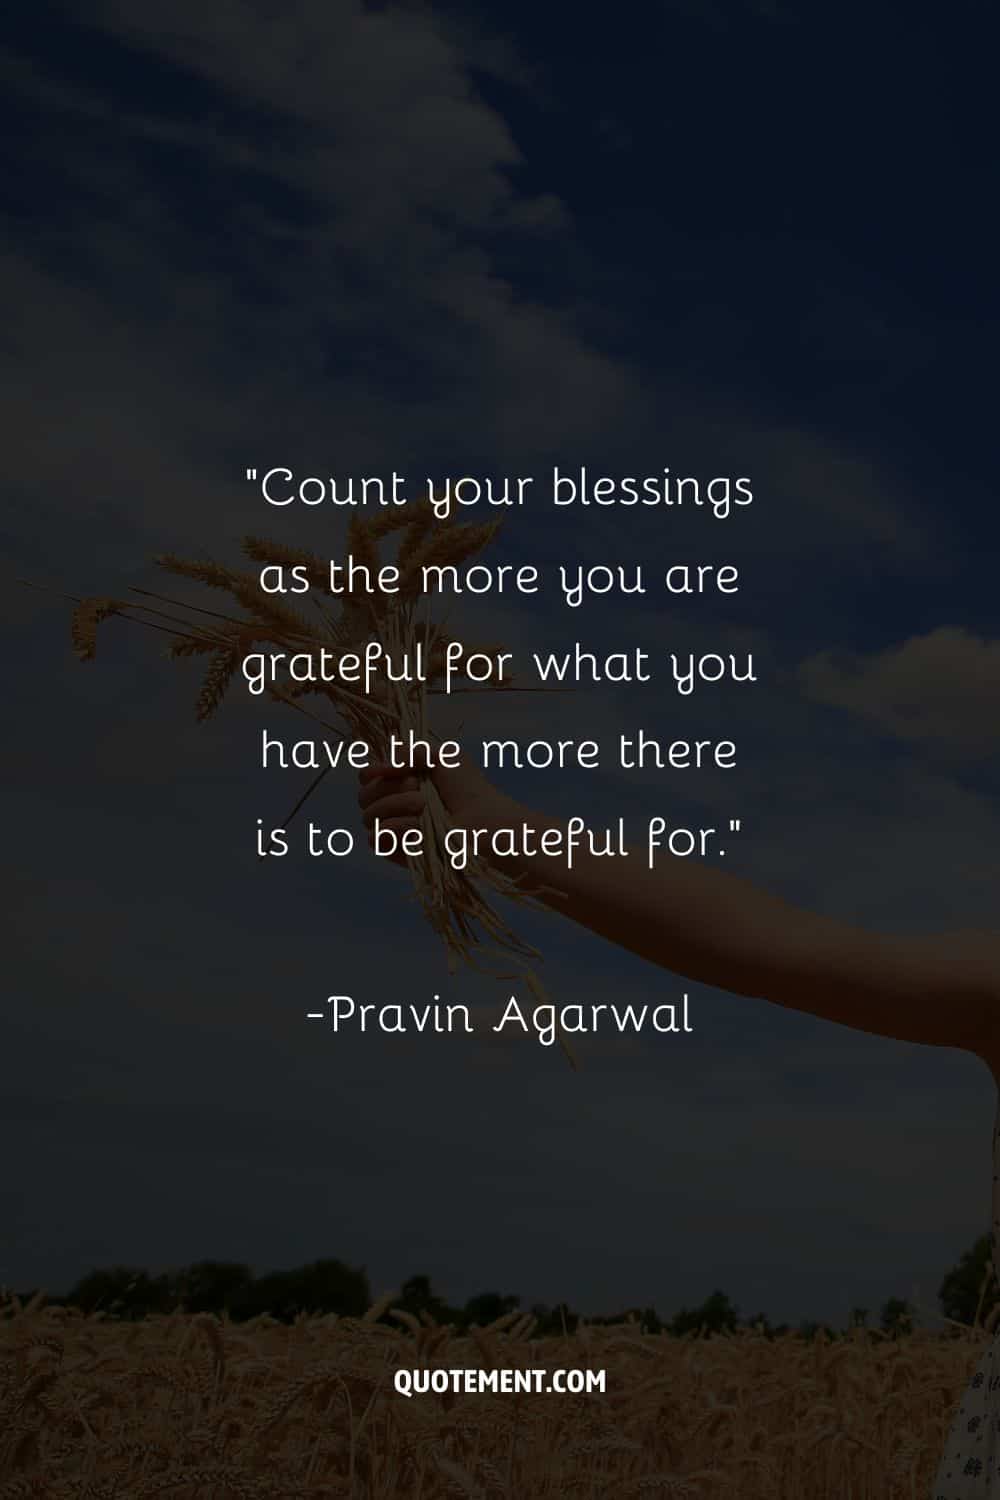 “Count your blessings as the more you are grateful for what you have the more there is to be grateful for.”